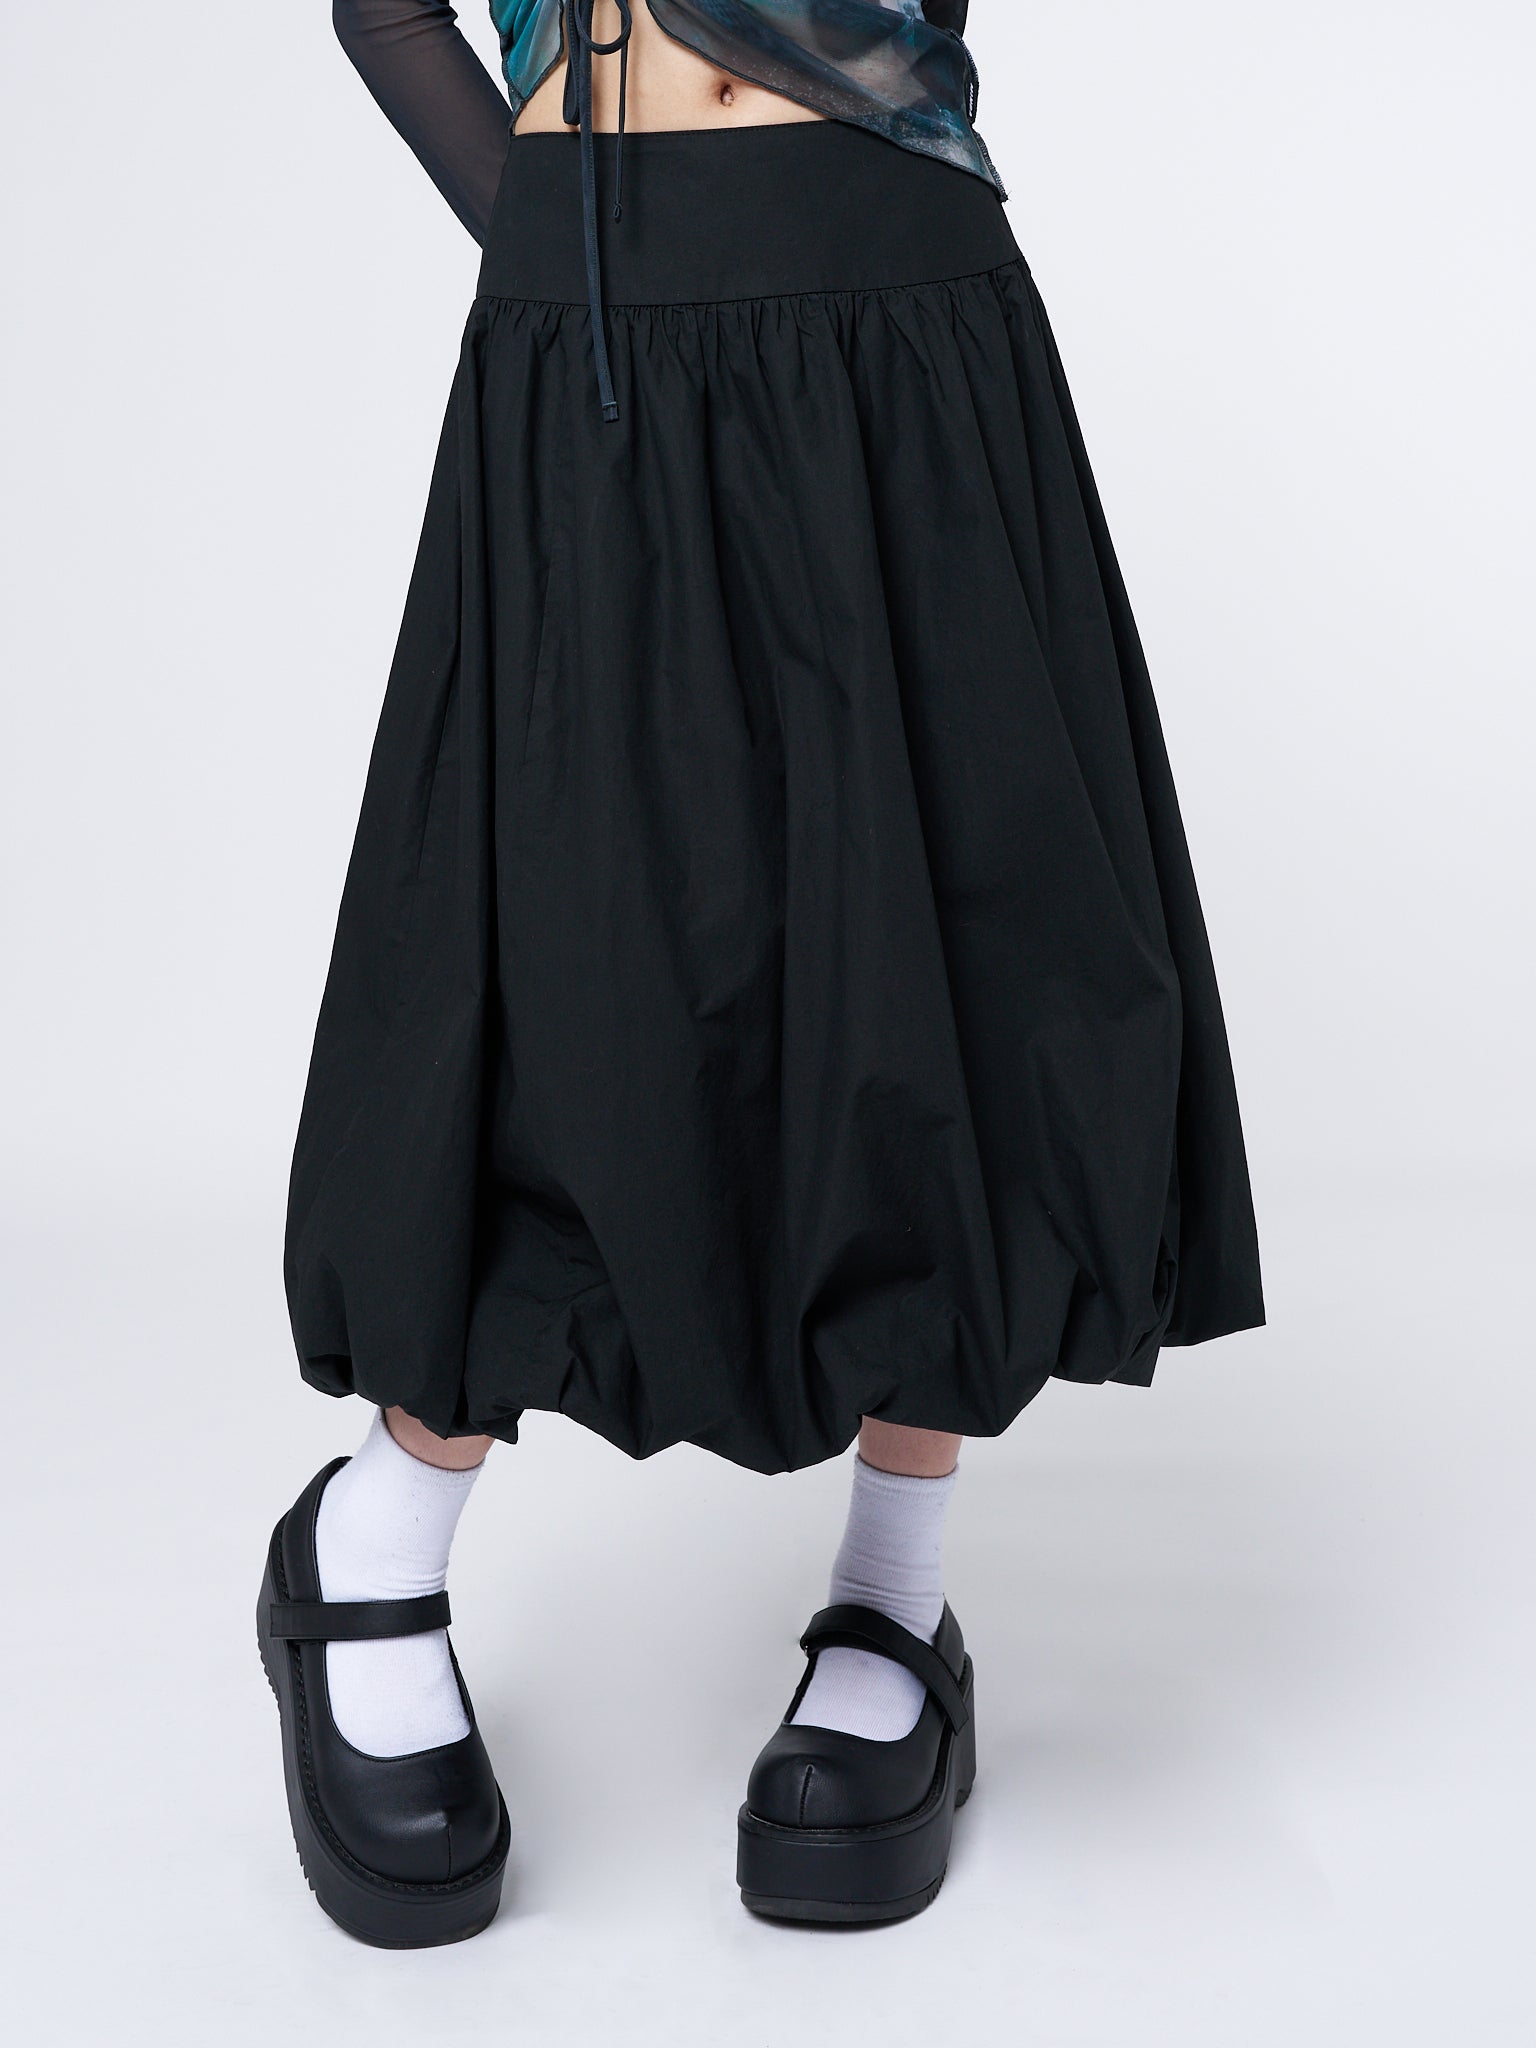 Black bubble midi skirt by Minga London. Flattering fit with playful silhouette. Versatile and stylish wardrobe essential.